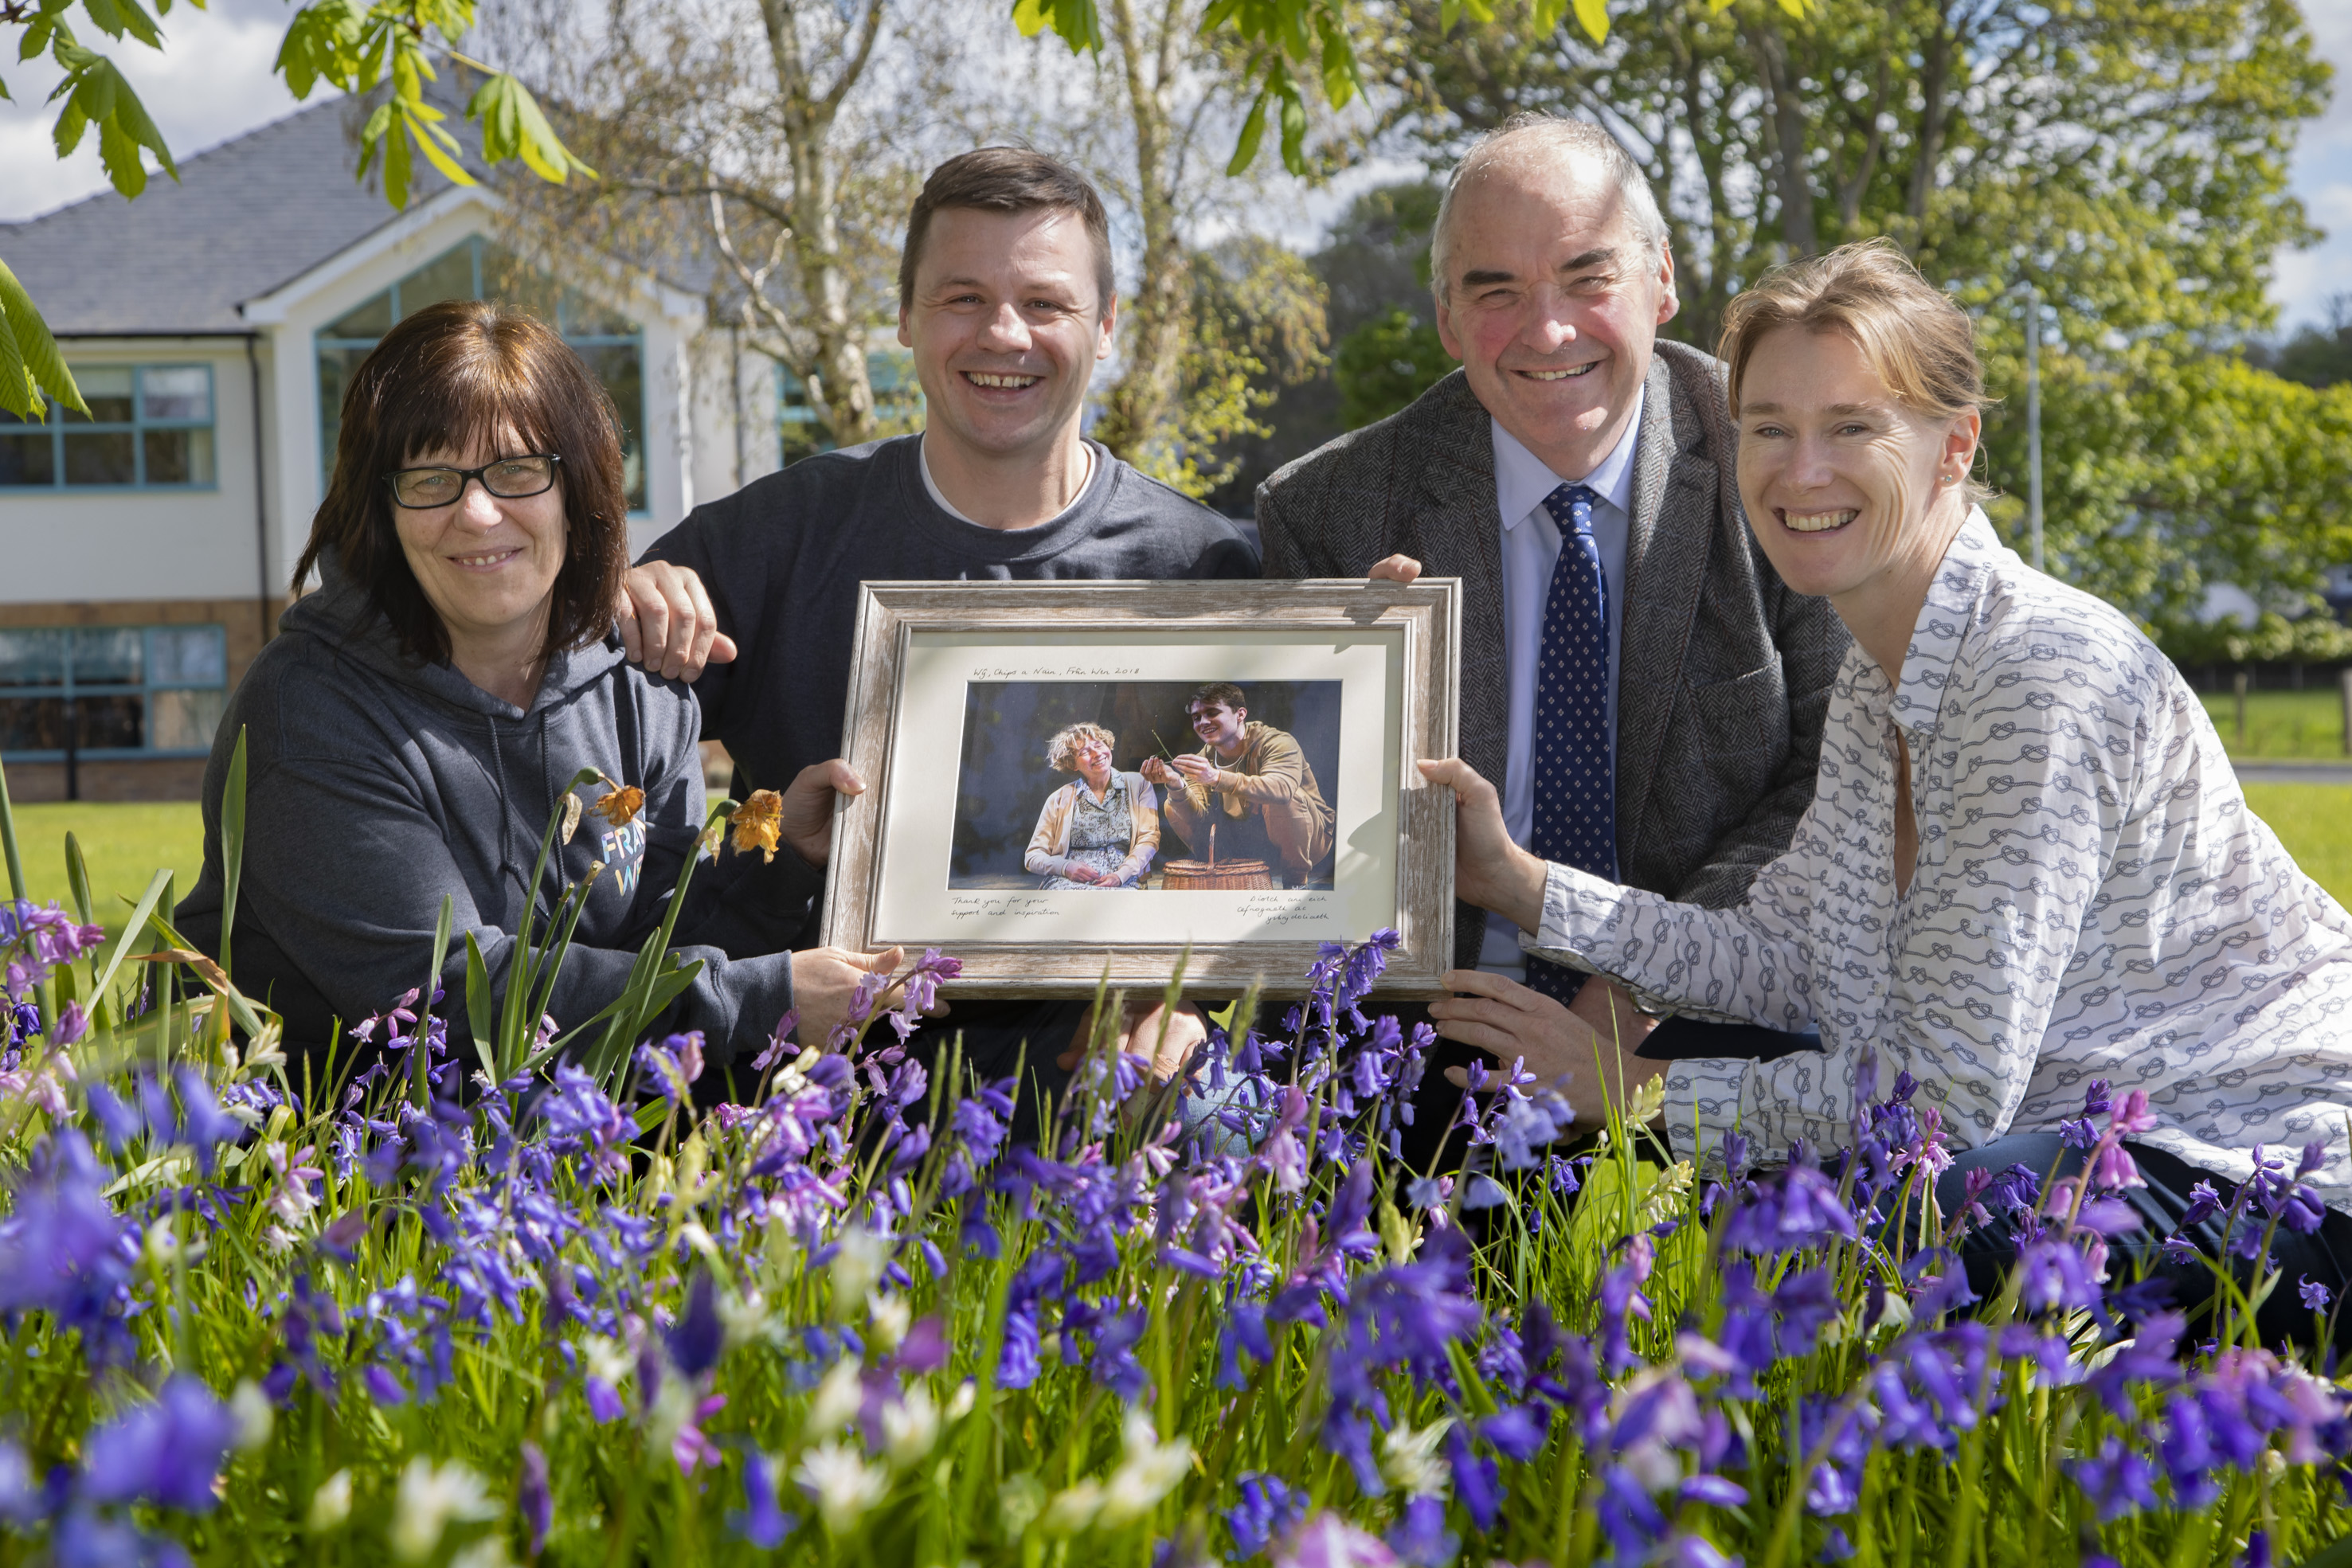 Theatre company thank care home residents for inspiring success of moving play about dementia